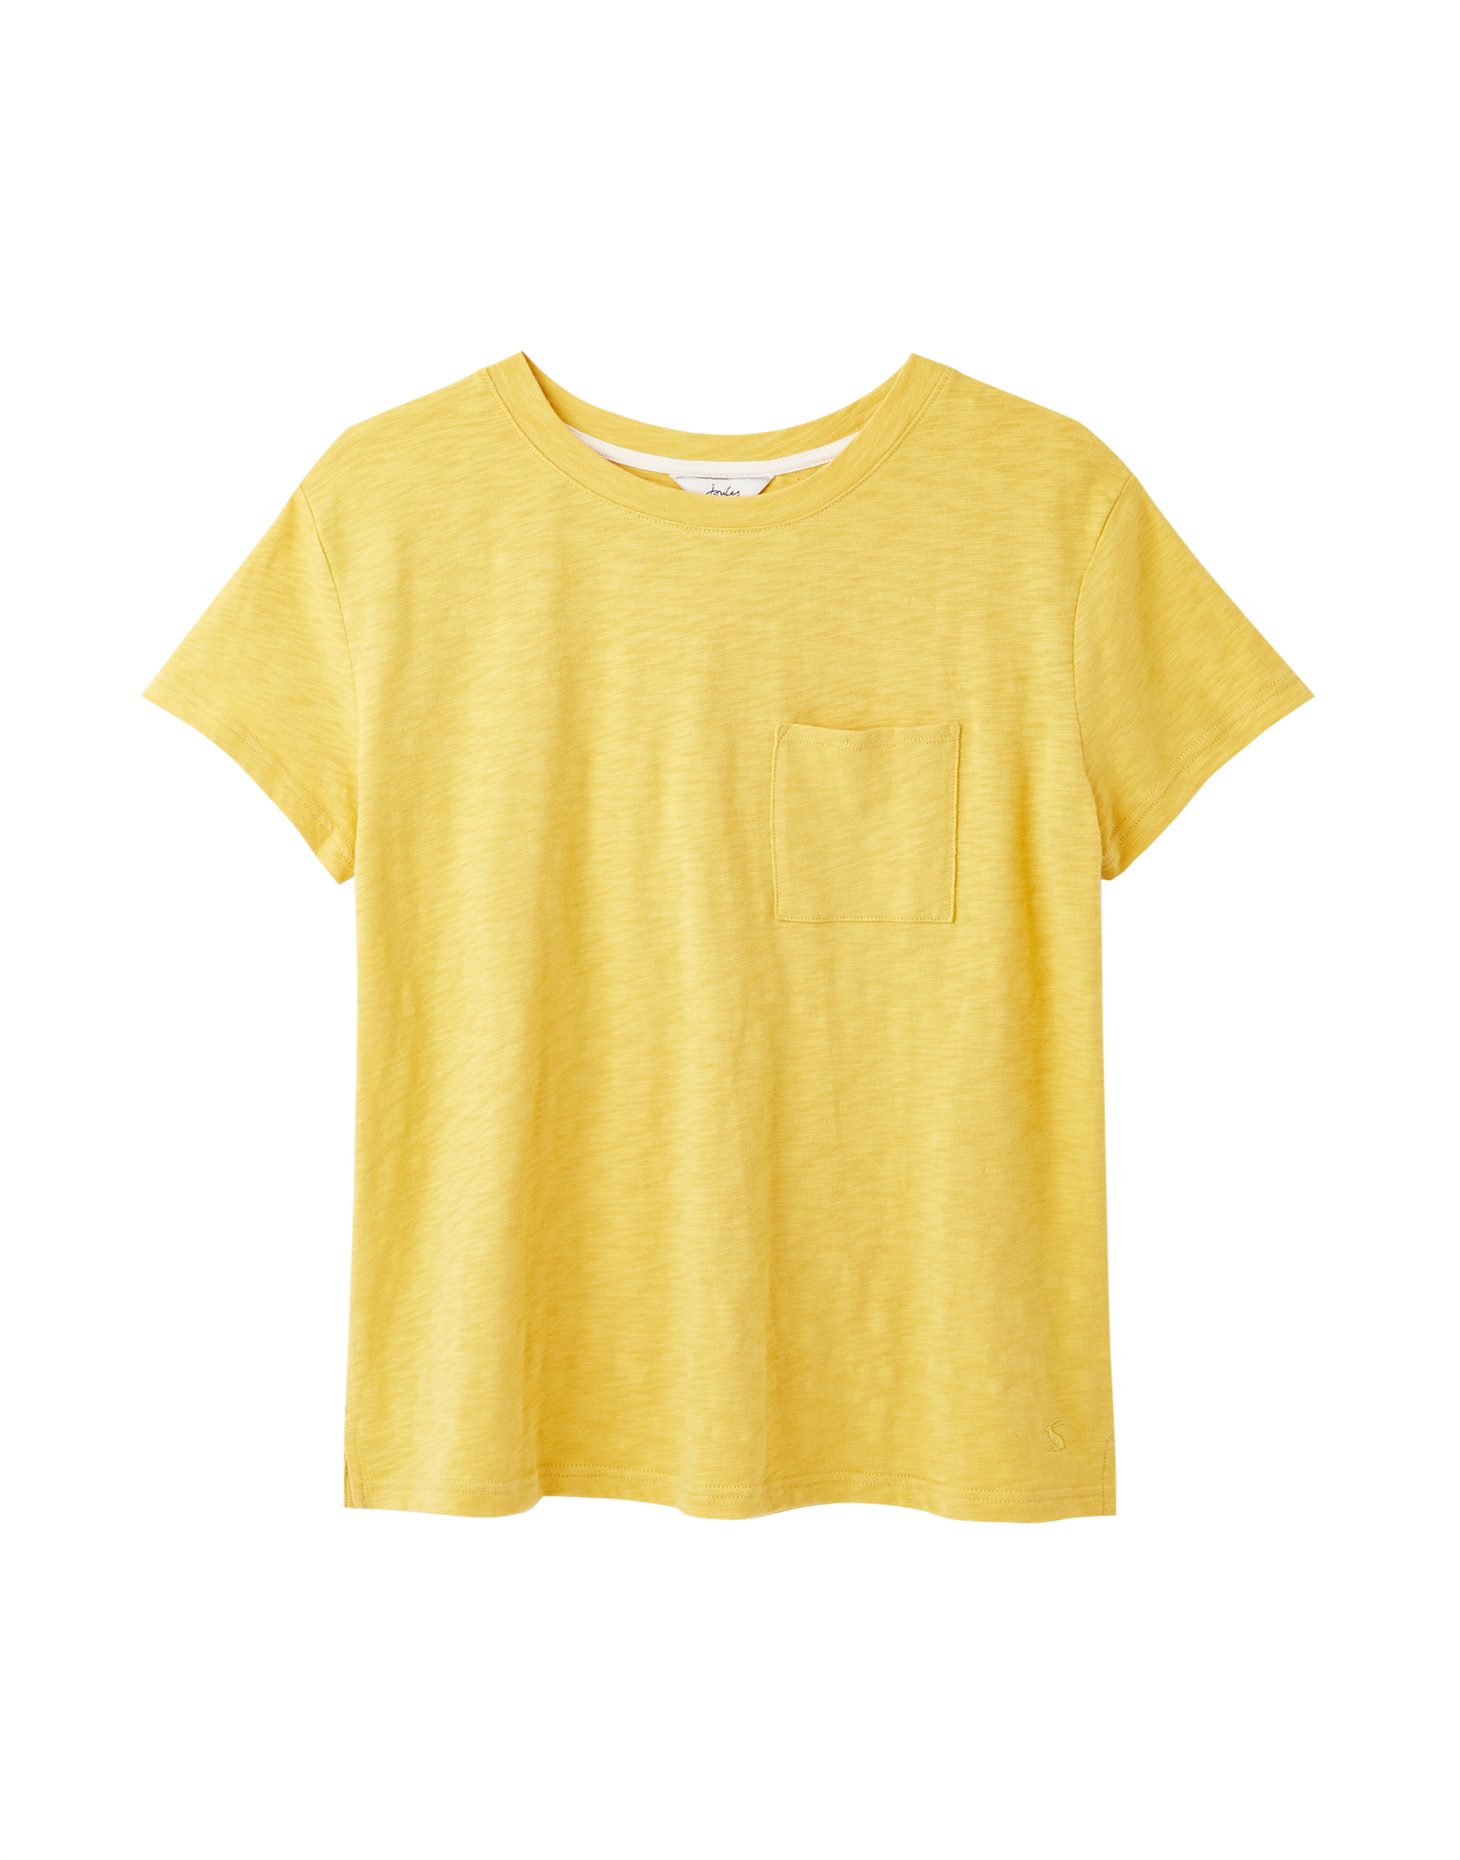 Joules 208702 Sofi T-Shirt With Pocket - Joules - Barsleys Department Store